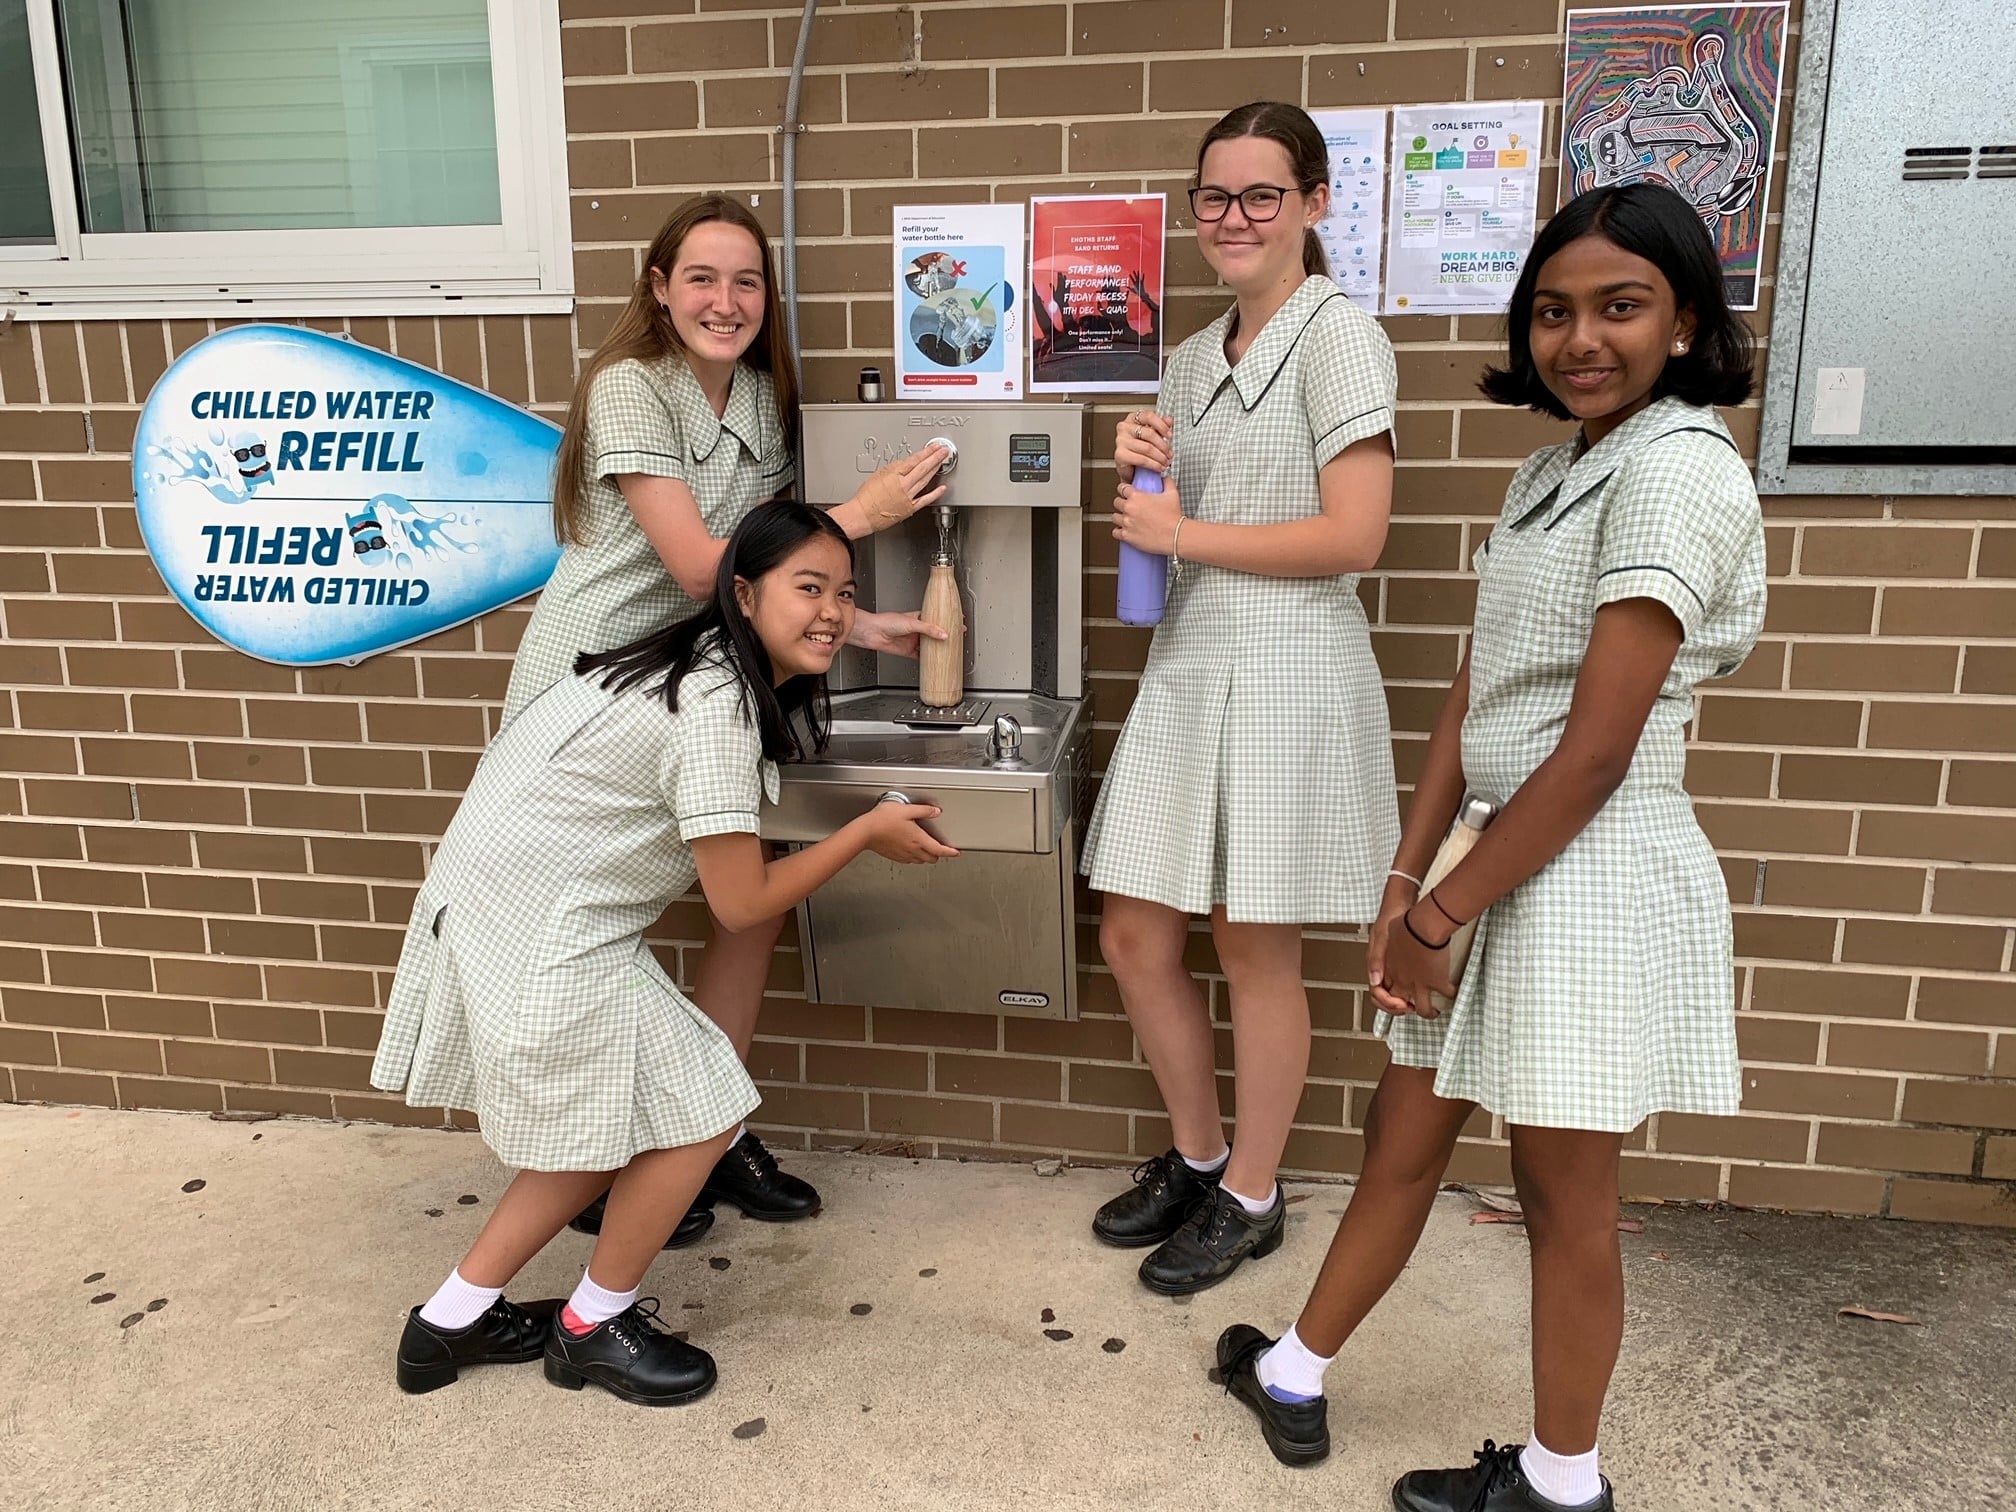 East Hills Girls' Technology High School students Yuthara Attanayake, Kieu-Jacey Nguyen, Olivia Petersen and Jenna Shaw fill up their water bottles at the school's new chilled water station.